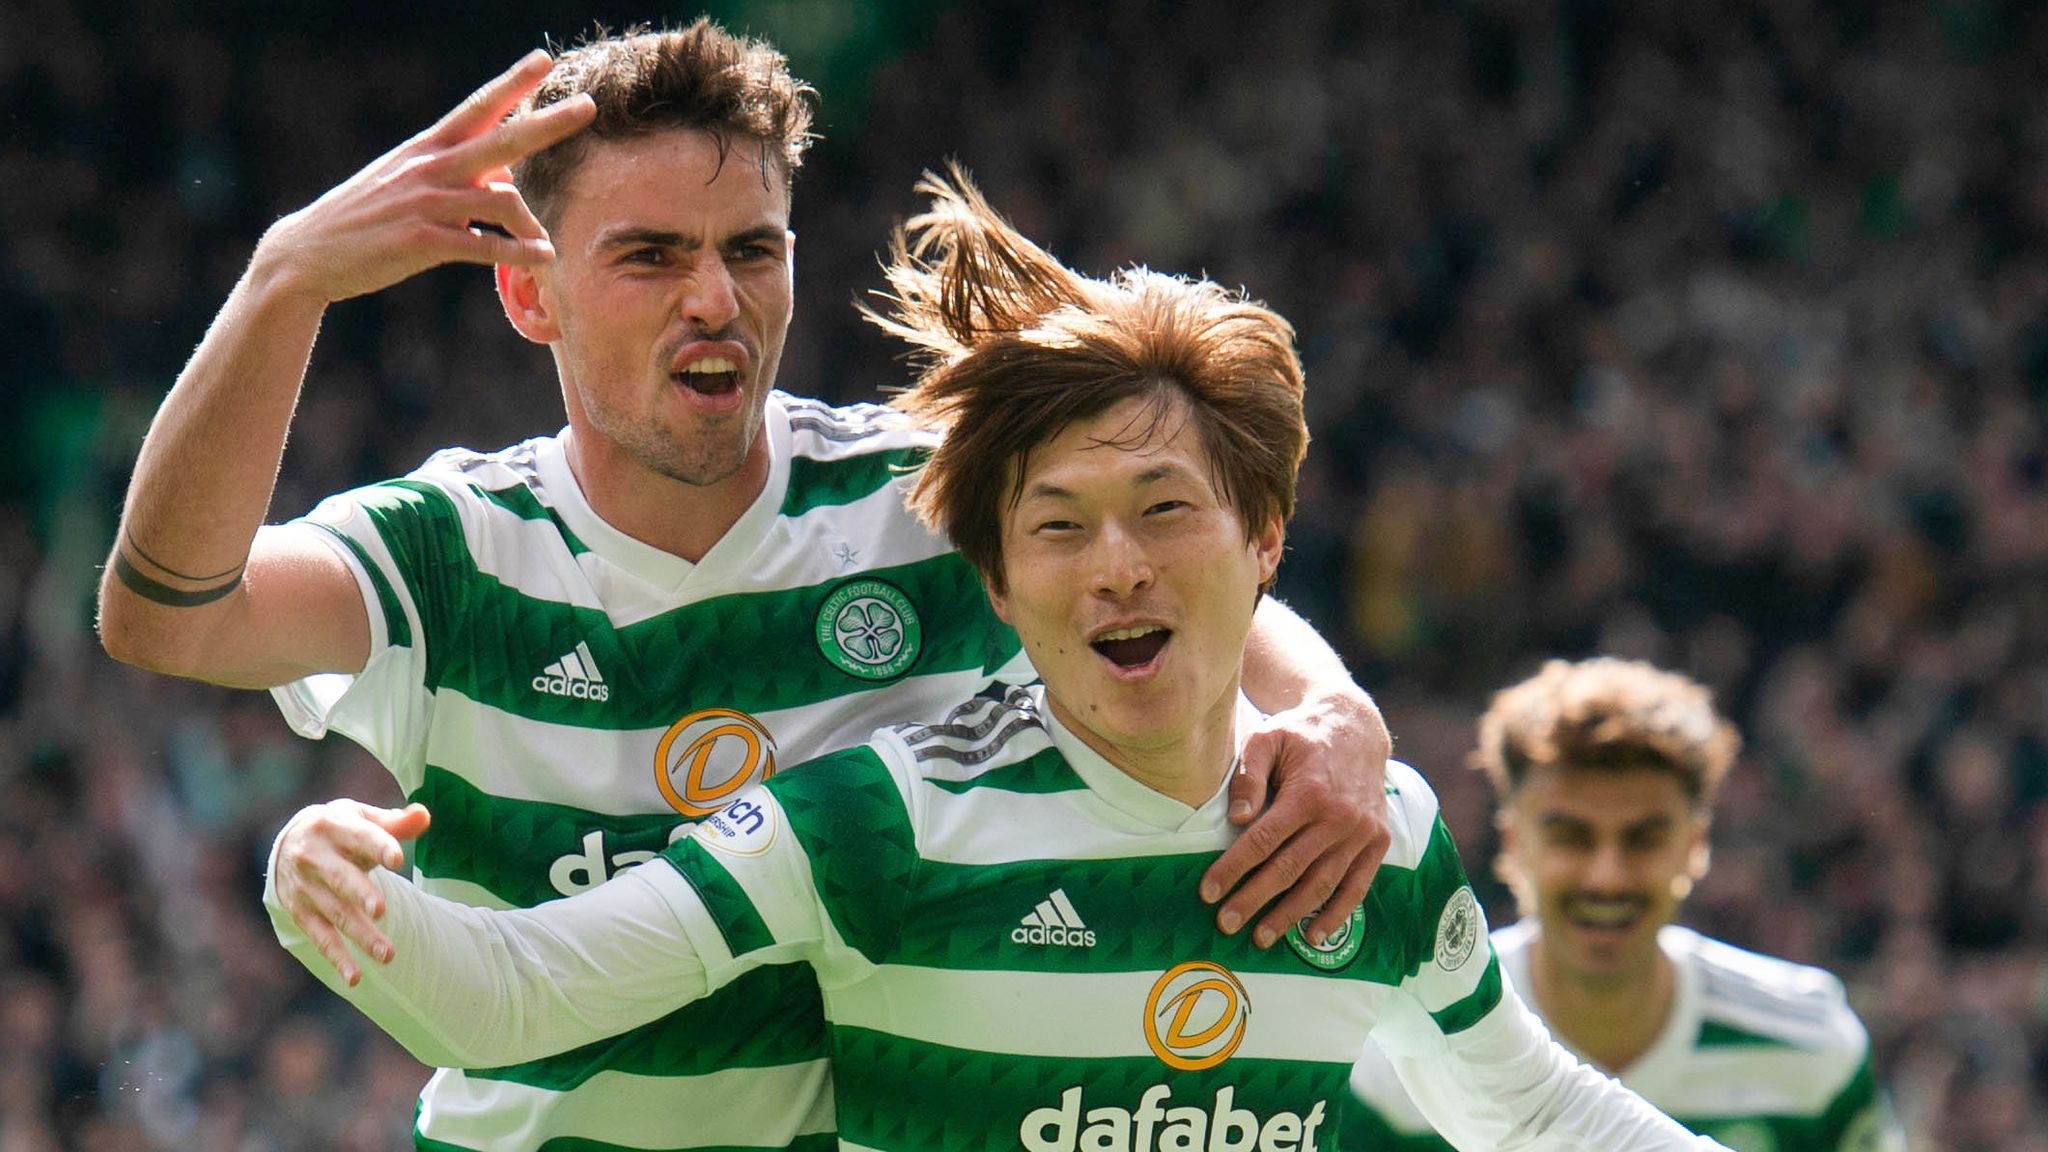 Celtic 3-2 Rangers Hoops move 12 points clear with victory in controversial Old Firm clash Football News Sky Sports